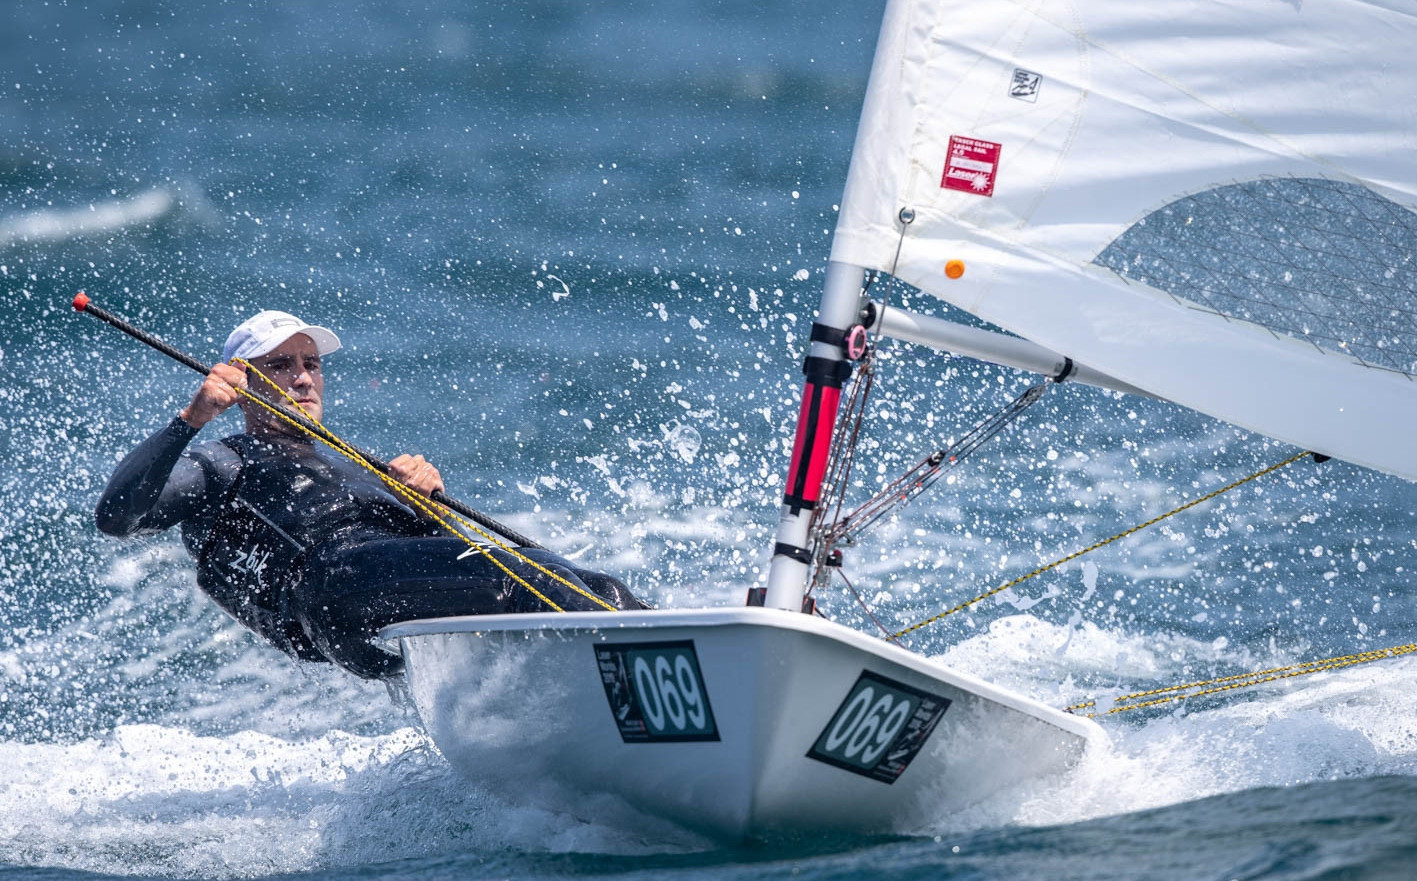 Perfect day sees Meech top qualifying at Laser Men's World Championship 